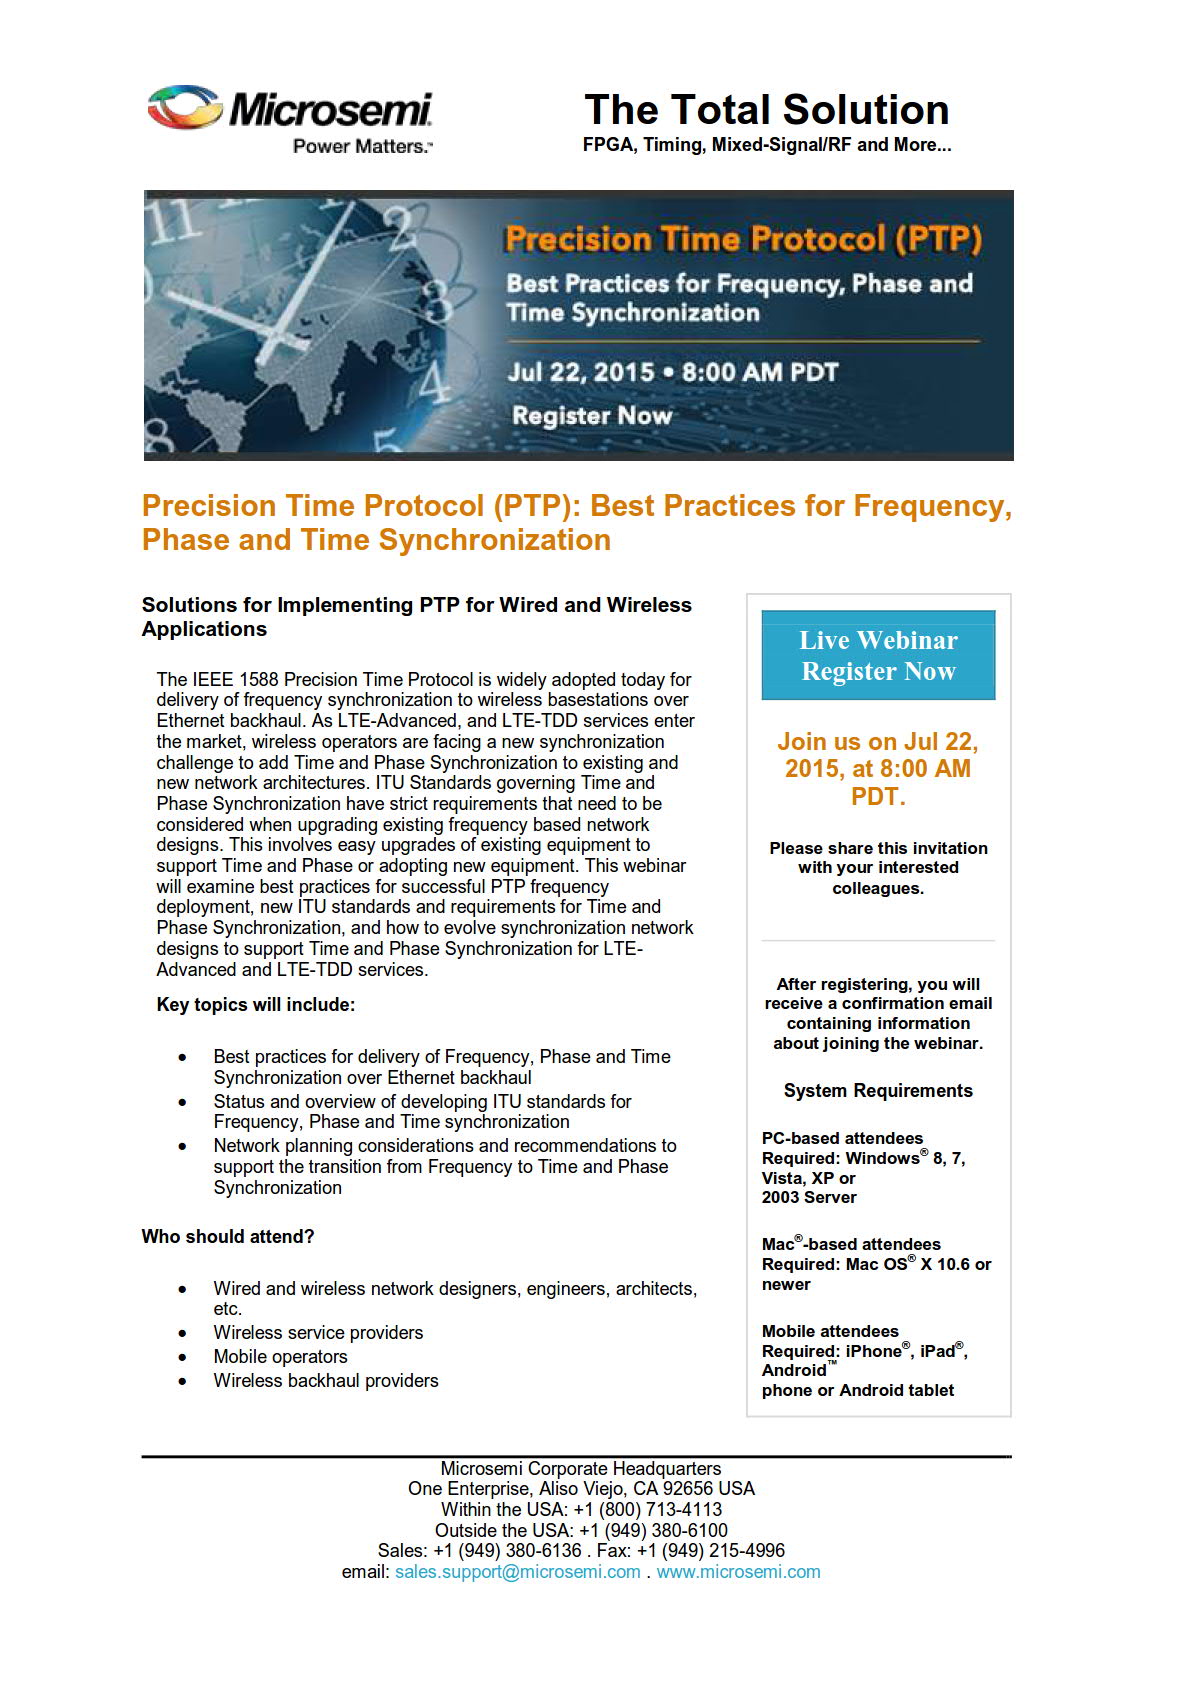 Precision Time Protocol (PTP): Best Practices for Frequency, Phase and Time Synchronisation